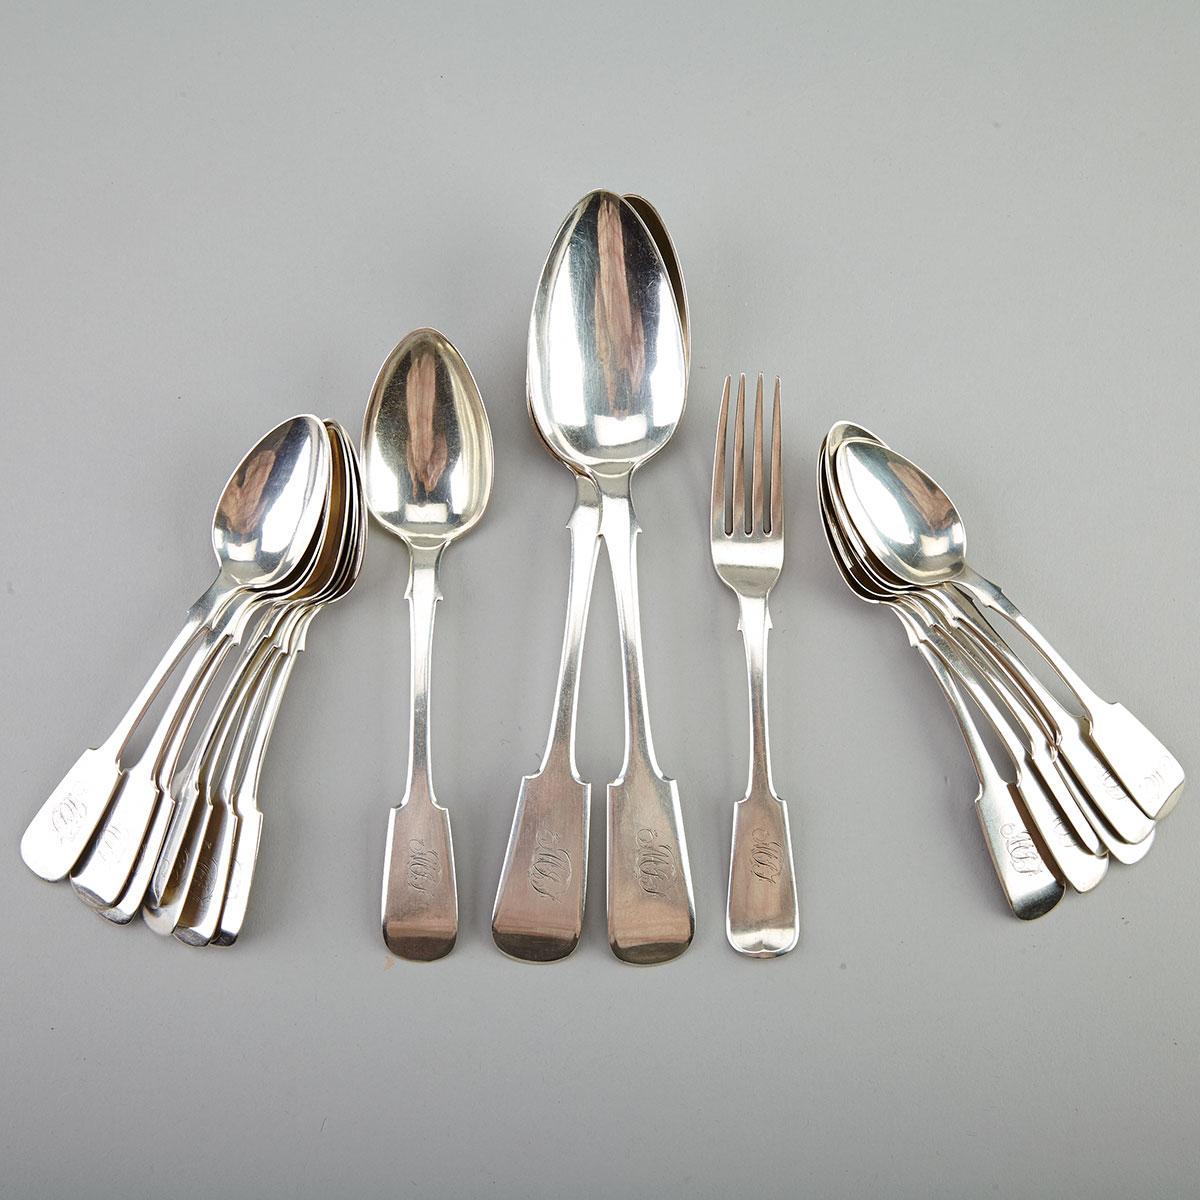 Thirteen Canadian Silver Fiddle Pattern Tea Spoons, Dessert Spoon and Fork and Pair of Table Spoons, Joseph Robinson & Co., Toronto, Ont., c.1865-70